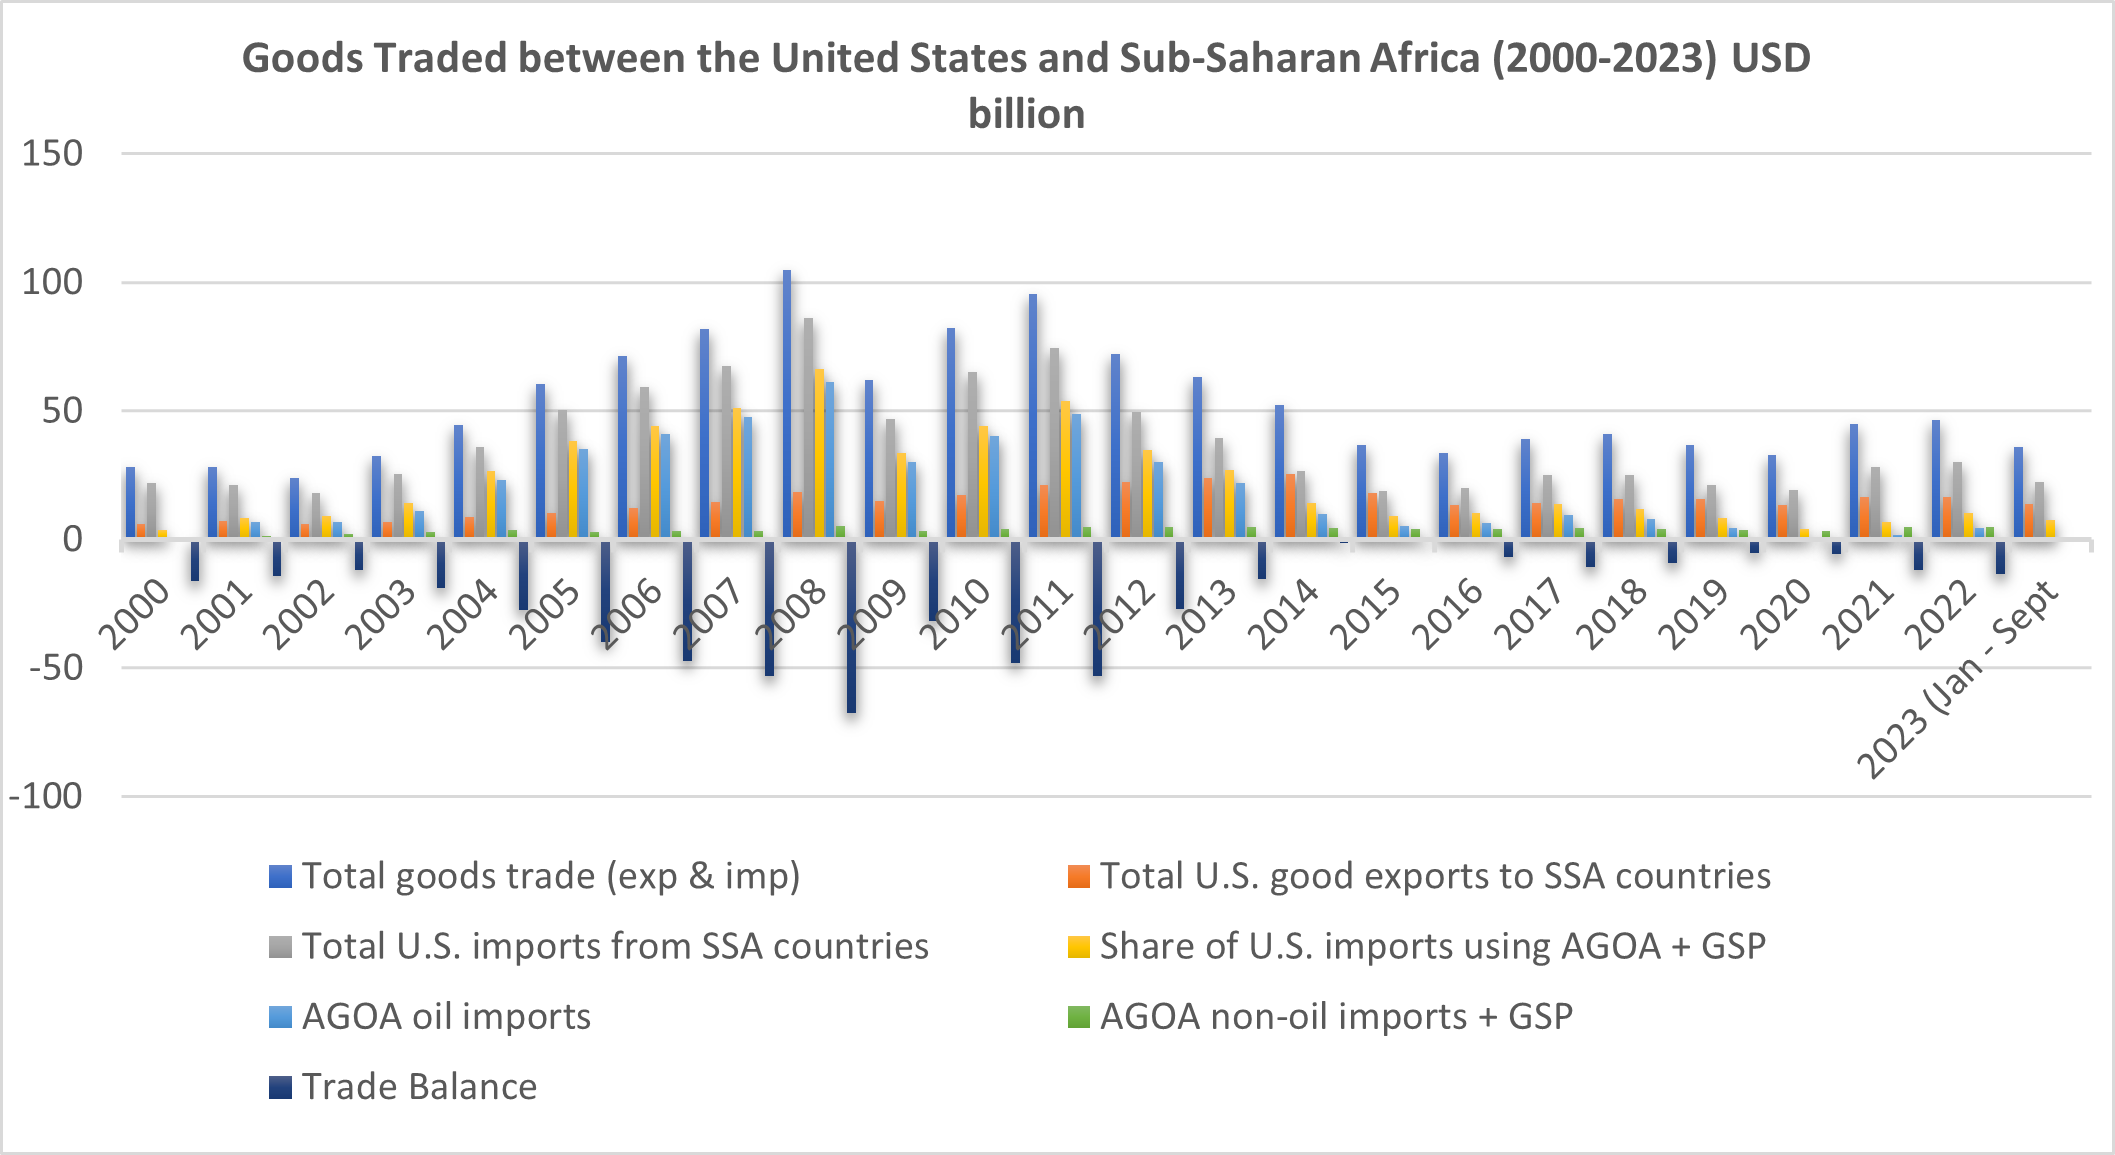 Goods traded between U.S. and SSA (2000-2023)